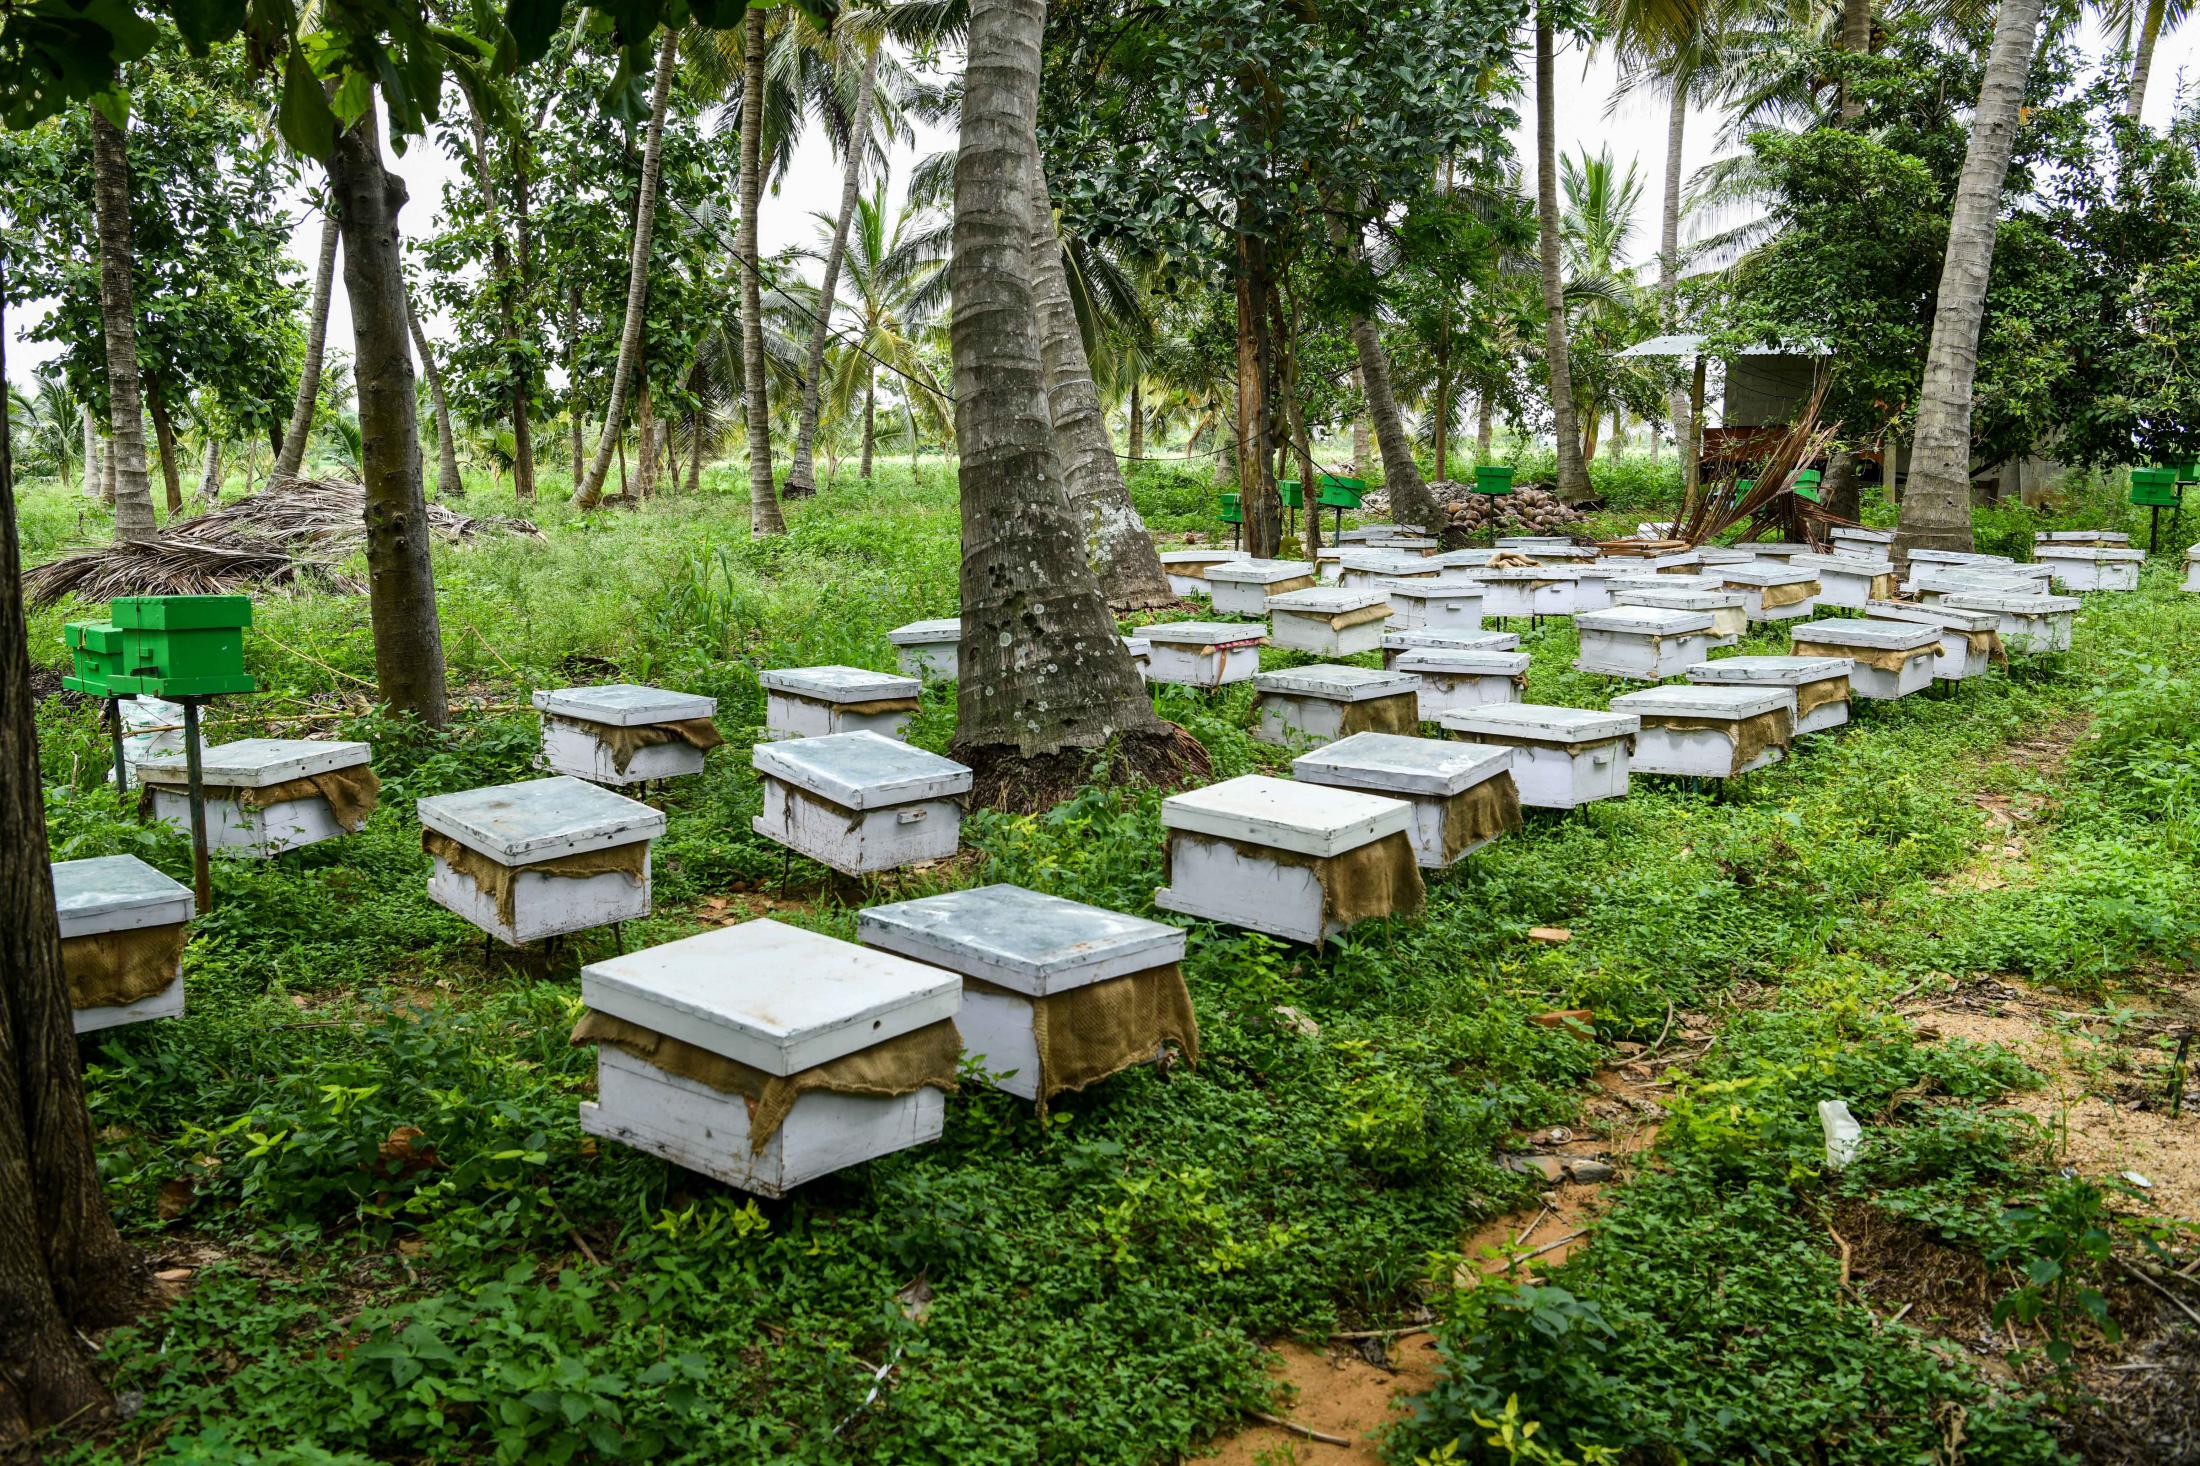 He initially collected bees from hives and then started breeding them in his apiary during the natural division season of bees. He also buys colonies from farmers when they multiply. This bee farm is near a cornfield which is rich in pollen. It is important to understand your demography he says. Having bee flora next to an apiary is very beneficial to harvest more honey and keep bees in good health. He harvests Indian bees in forests and hilly regions and also promotes only Indian bees to farmers as it&rsquo;s easier since most of them cannot handle migratory beekeeping. European bees which in India are Italian bees requires 4-7 migrations in a year for which, he travels around 1,200 kms pollinating thousands of acres in North Karnataka mainly Sunflowers, Til, Niger, Coconuts, Arecanuts, Banana, Avacado, Litchi and more. Honey yielding fields for Italian bees are Sunflowers, Eucalyptus, Til and Niger. He has more than 200 colonies now and will split them to make about 800 during the breeding season. A farmer keeps anywhere between 4-25 boxes. He needs about 3 boxes per acre and has to distance each colony by at least 10 feet. Bee Harvesting has helped Coorg flood victims make a livelihood Vijay Panduranga talks about the effects of the flood and the rehabilitation work in Coorg. After the floods in 2018 that hit Coorg, a lot of farmers lost their land in turn livelihood and haven&rsquo;t received much relief from the government. There were rescue operations but then not much is being done on the rehabilitation front. With paltry compensation from the govt. Coorg flood victims are finding solace in the new beekeeping venture. Nectar flow is an initiative/program started by a few local people, spearheaded by Retd. Brigadier Devaiah to help provide a steady income to people interested in beekeeping. People have seen returns in the 1st few months. They say that the money that comes in lets them breathe. While beekeeping in an age-old tradition in Coorg, the methods are ancient. Devaiah was on the lookout for someone with a scientific approach to help them and that&rsquo;s when he found Apoorva and sought help. Apoorva readily agreed and continues to work closely with the farmers. He has helped the farmers understand the species better, eventually getting them better yields. At Coorg, each farmer makes a minimum of 5 kgs of honey per year and each box sells at Rs. 600/- per kg. They also make money by selling colonies at Rs. 1,500/- per colony. Farmers produce about 2-3 kgs of beeswax per year which is approximately Rs. 350/ kg Farmers from the North East, Chhattisgarh, Coorg and other parts of India find it difficult to sell the honey and wax that they produce. Apoorva helps them by buying the whole lot from them, filters them further if there&rsquo;s moisture and sells them as and when he gets enquires. Honey is labeled as per the flowering season such as litchi, cardamom, clover, mustard, chilli, etc., the honey tastes different too. The by-products such as beeswax, royal jelly and bees venom are other sources of income and, used in pharmaceuticals and beauty products. The below-mentioned statistics are only an example of how bee pollination increases the yield anywhere between15% &ndash; 80%. These are scientifically proven numbers in ideal conditions (these are underestimated values). Estimated global economic value of pollination is 217 billion USD in 2005 Crop &nbsp; &nbsp; &nbsp; Increase in yield per acre (%) Increase in yield per acre Income generation by pollination per acre Coffee 15% 5 Bags 15,000/- Aracanut &nbsp; 25% 2 Quintals 64,000/- Coconut&nbsp; 20% 3,000 nuts 36,000/- Banana 20% 5 Quintals 10,000/- Watermelon &nbsp; 80% 4 Tonnes 20,000/- Farmers tell us their personal stories of how beekeeping has helped increase their yield with pollination in crops such as coffee, fruits and spices. They also make a good livelihood but extracting honey and wax. What they make is pure and unadulterated making the quality far more superior than the ones available off the shelves at supermarkets.